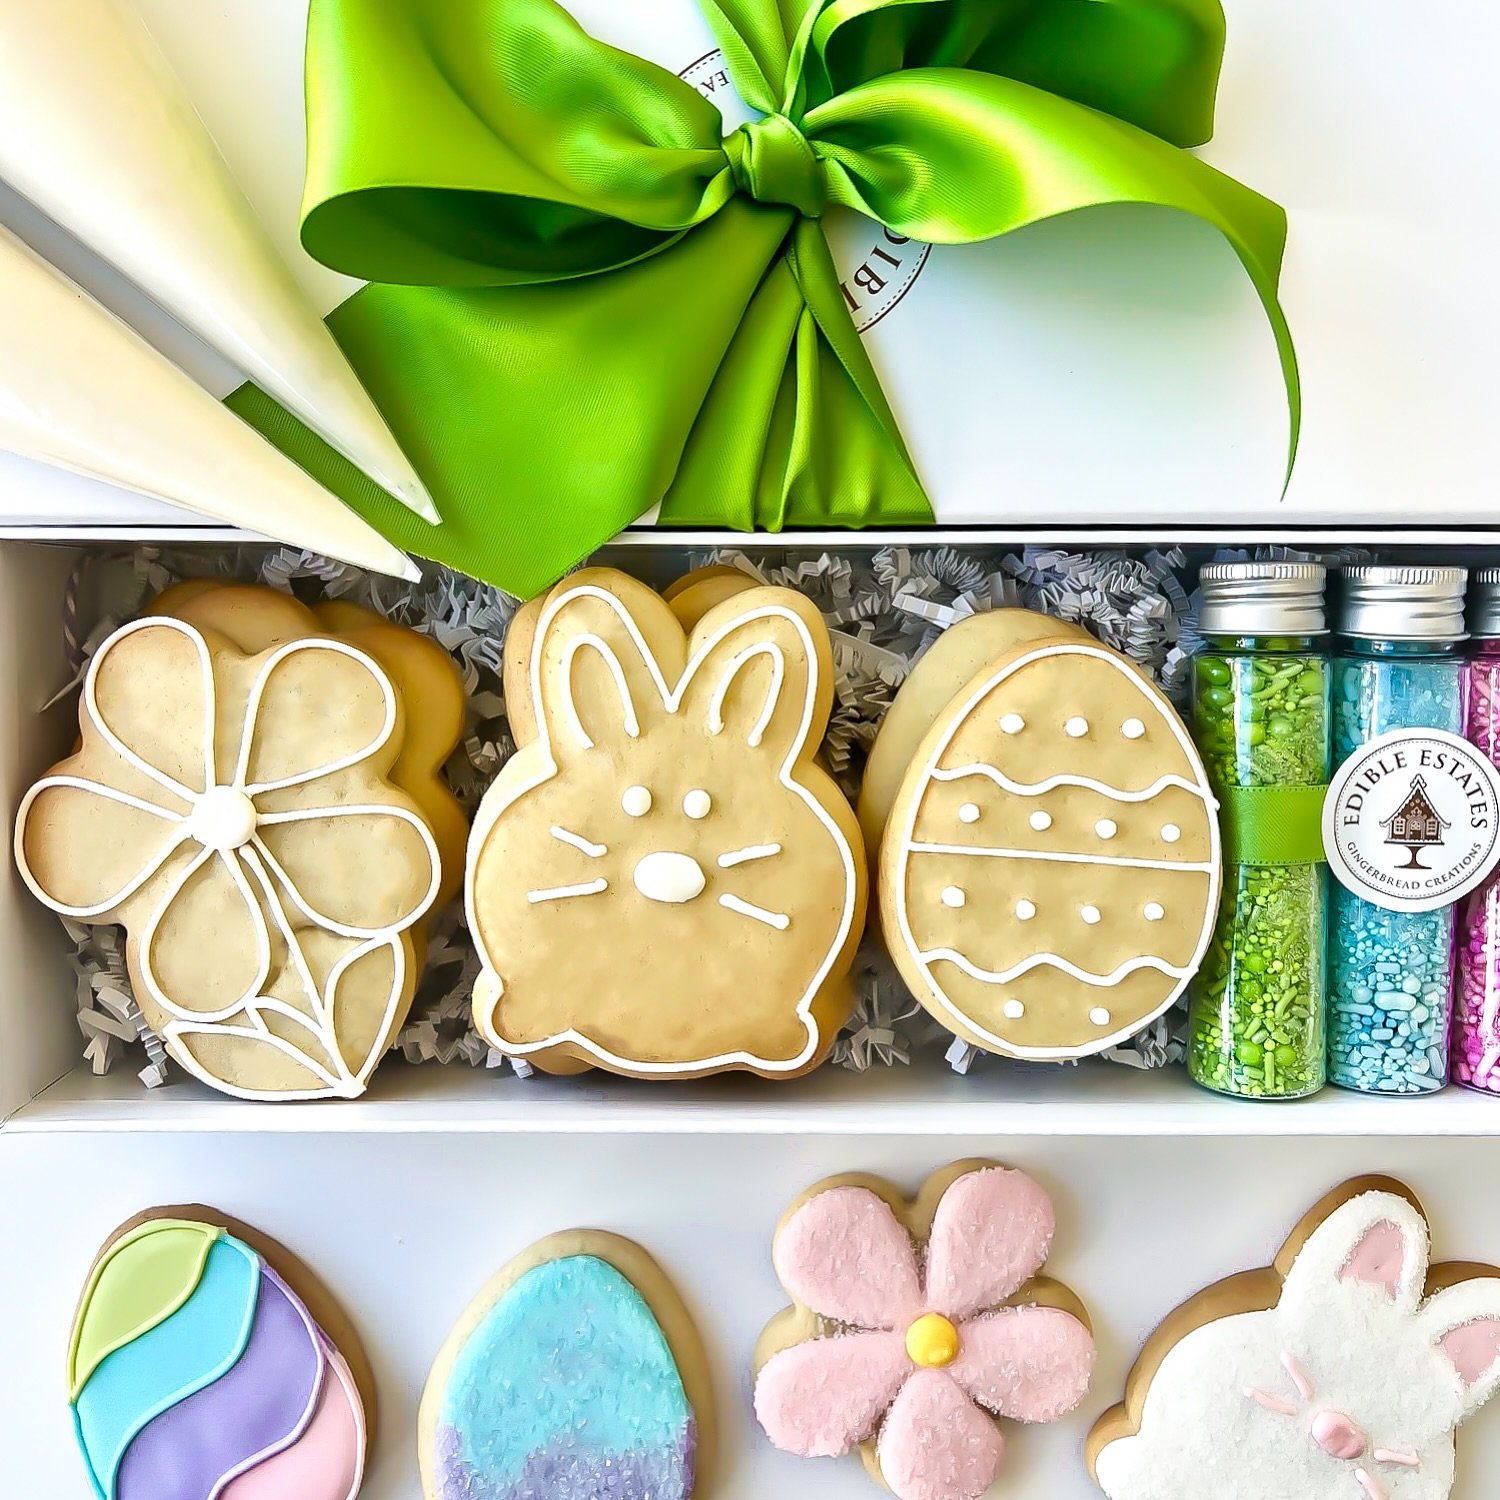 Every season is sweeter with our seasonal cookie decorating kits! ✨ Our spring edition was the perfect blend of freshness and fun. Wouldn&rsquo;t you agree?